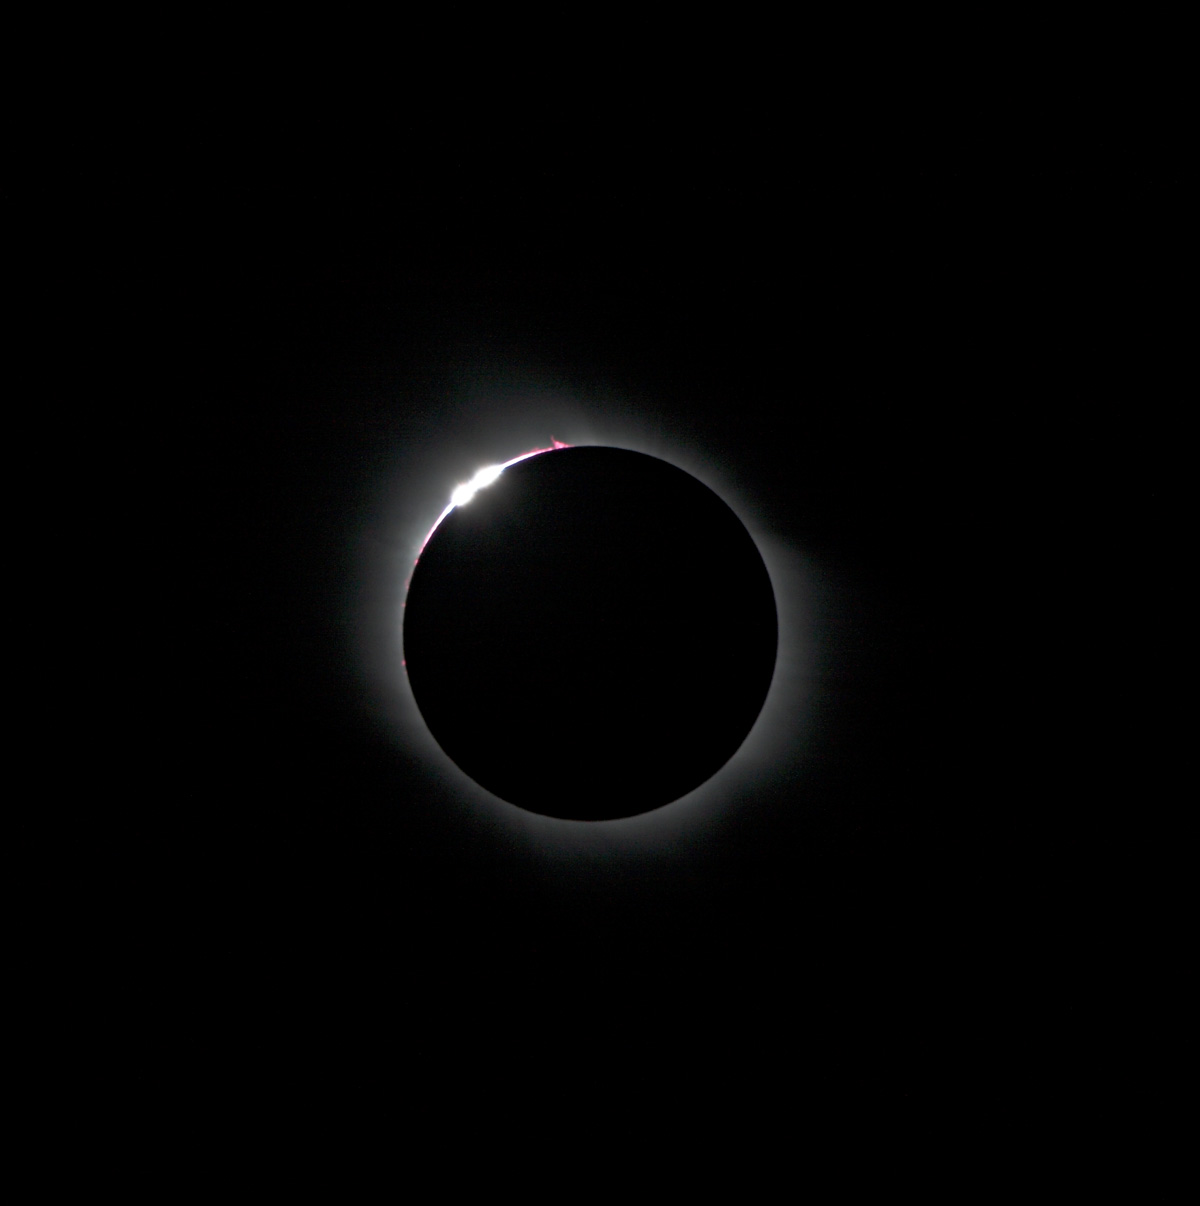 2006 total solar eclipse taken by Marco Cosmacini: 116 KB; click on the image to enlarge